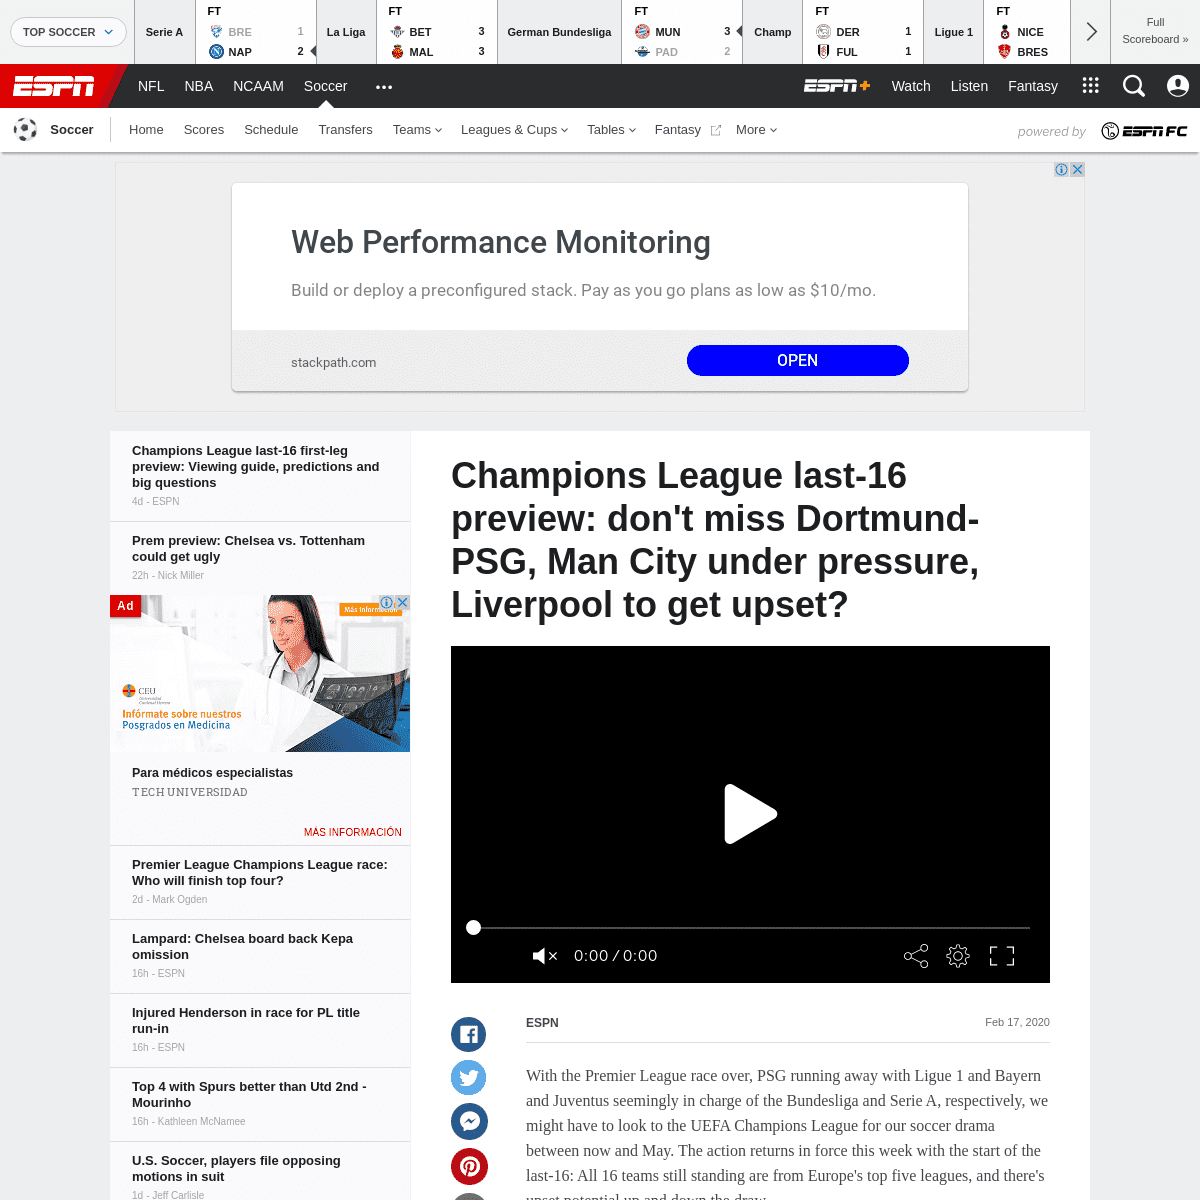 A complete backup of www.espn.com/soccer/uefa-champions-league/story/4054232/champions-league-last-16-preview-dont-miss-dortmund